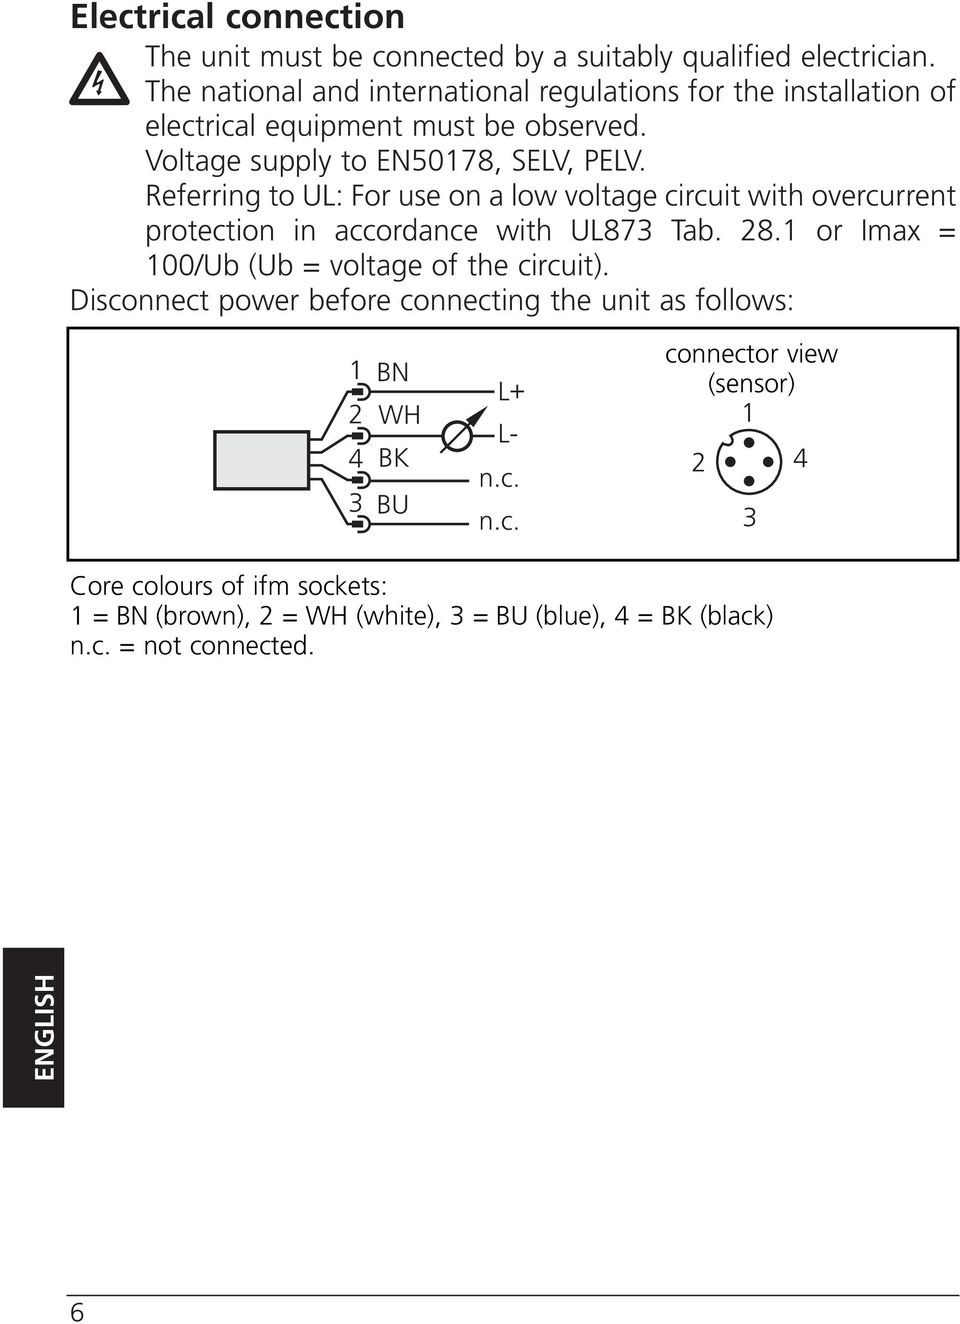 Referring to UL: For use on a low voltage circuit with overcurrent protection in accordance with UL87 Tab. 28.